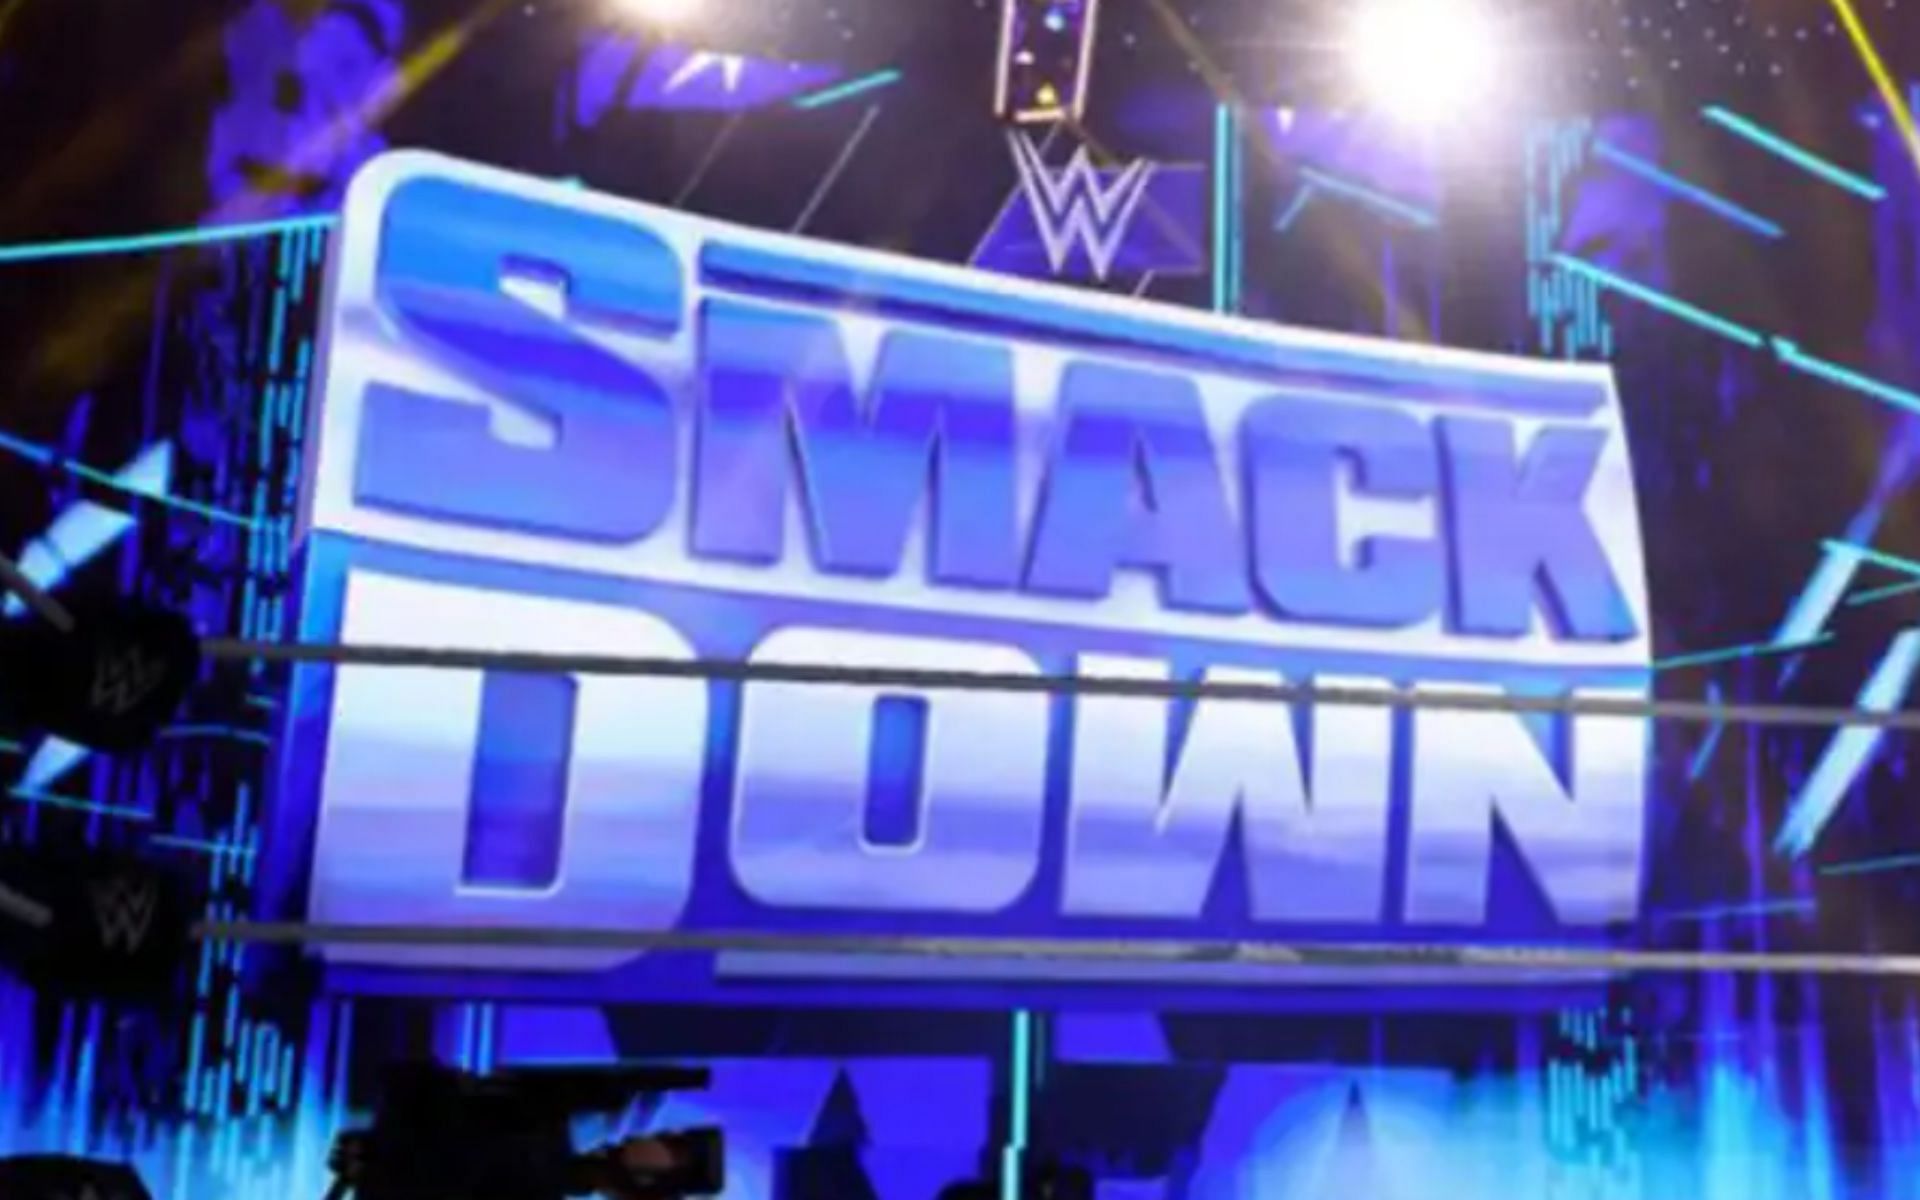 A major championship tournament is set to take place on SmackDown